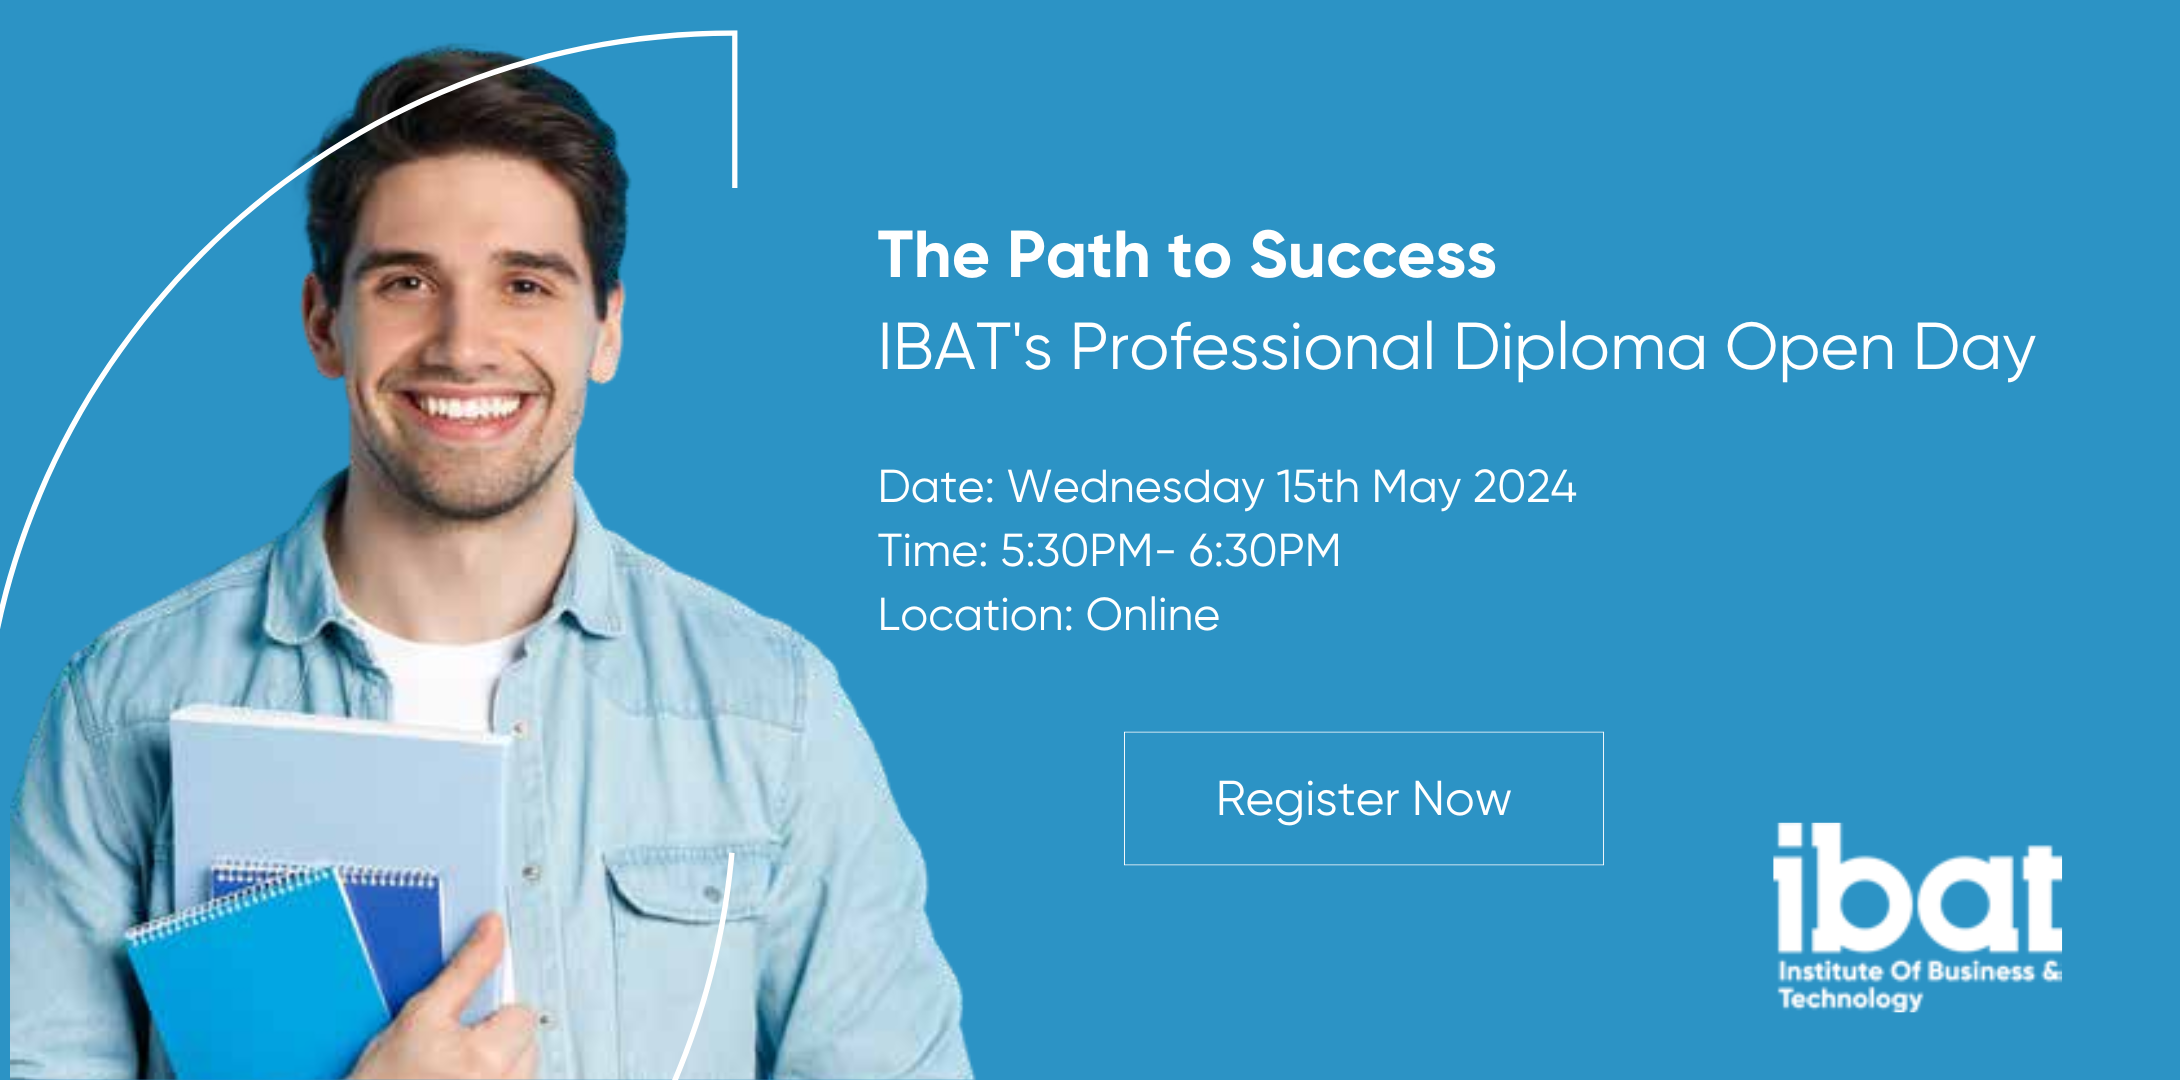 IBAT Online Open Evening, Wednesday 15th of May, 5:30pm - 6:30pm 